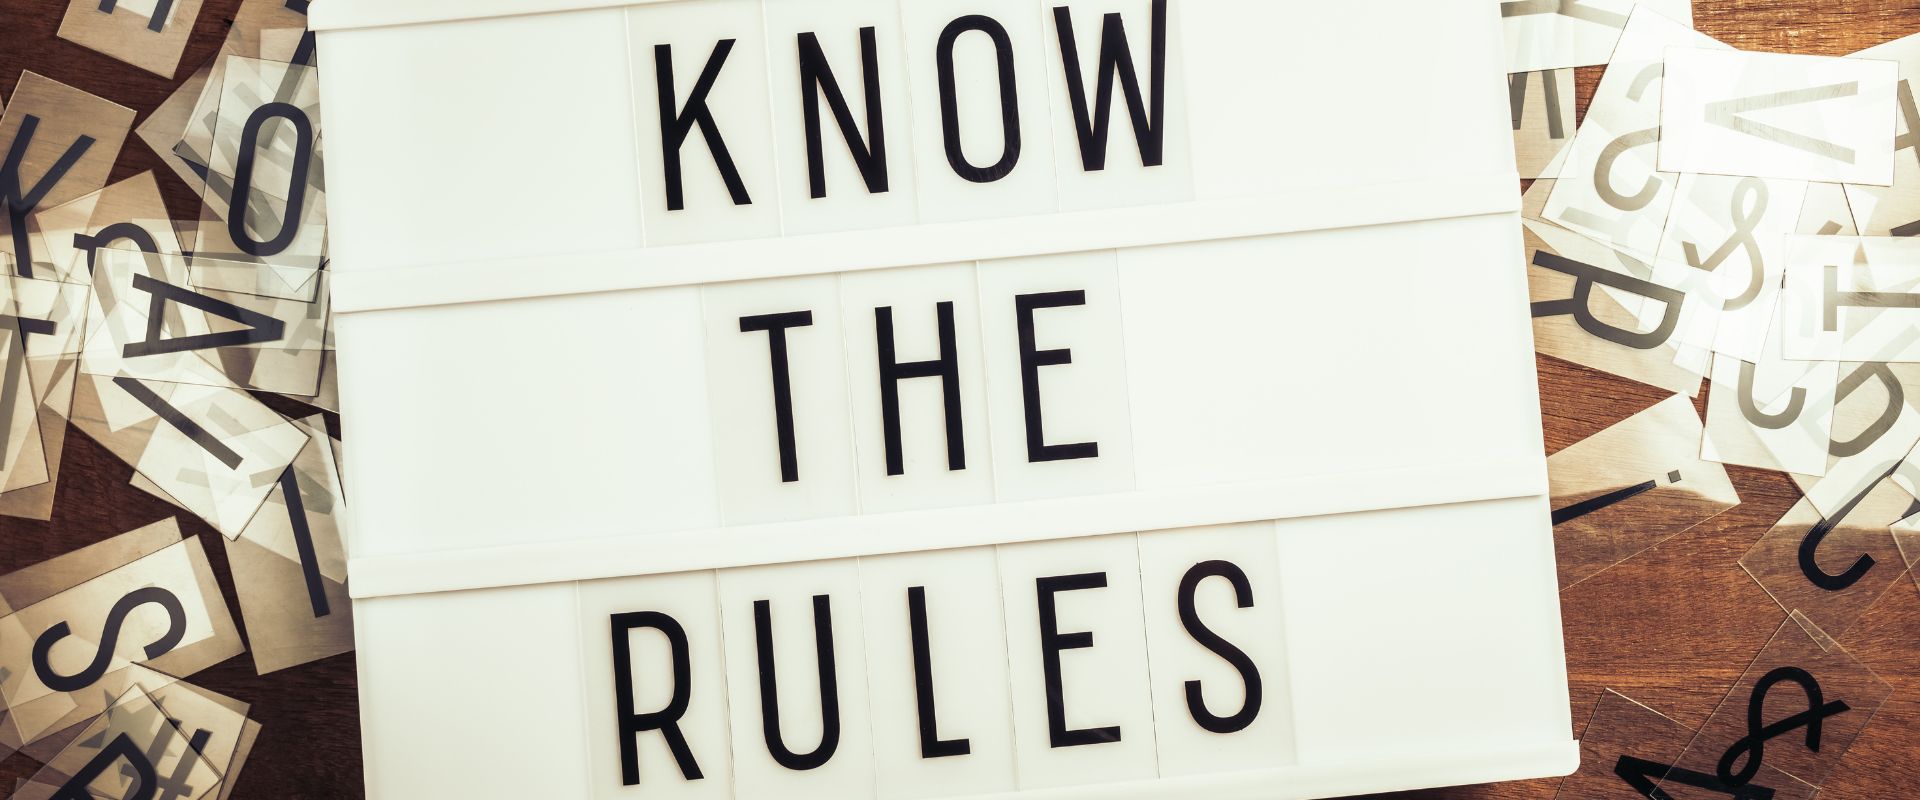 Writing: "know the rules" wager you to inform you about Medicare 8-minute rule chart